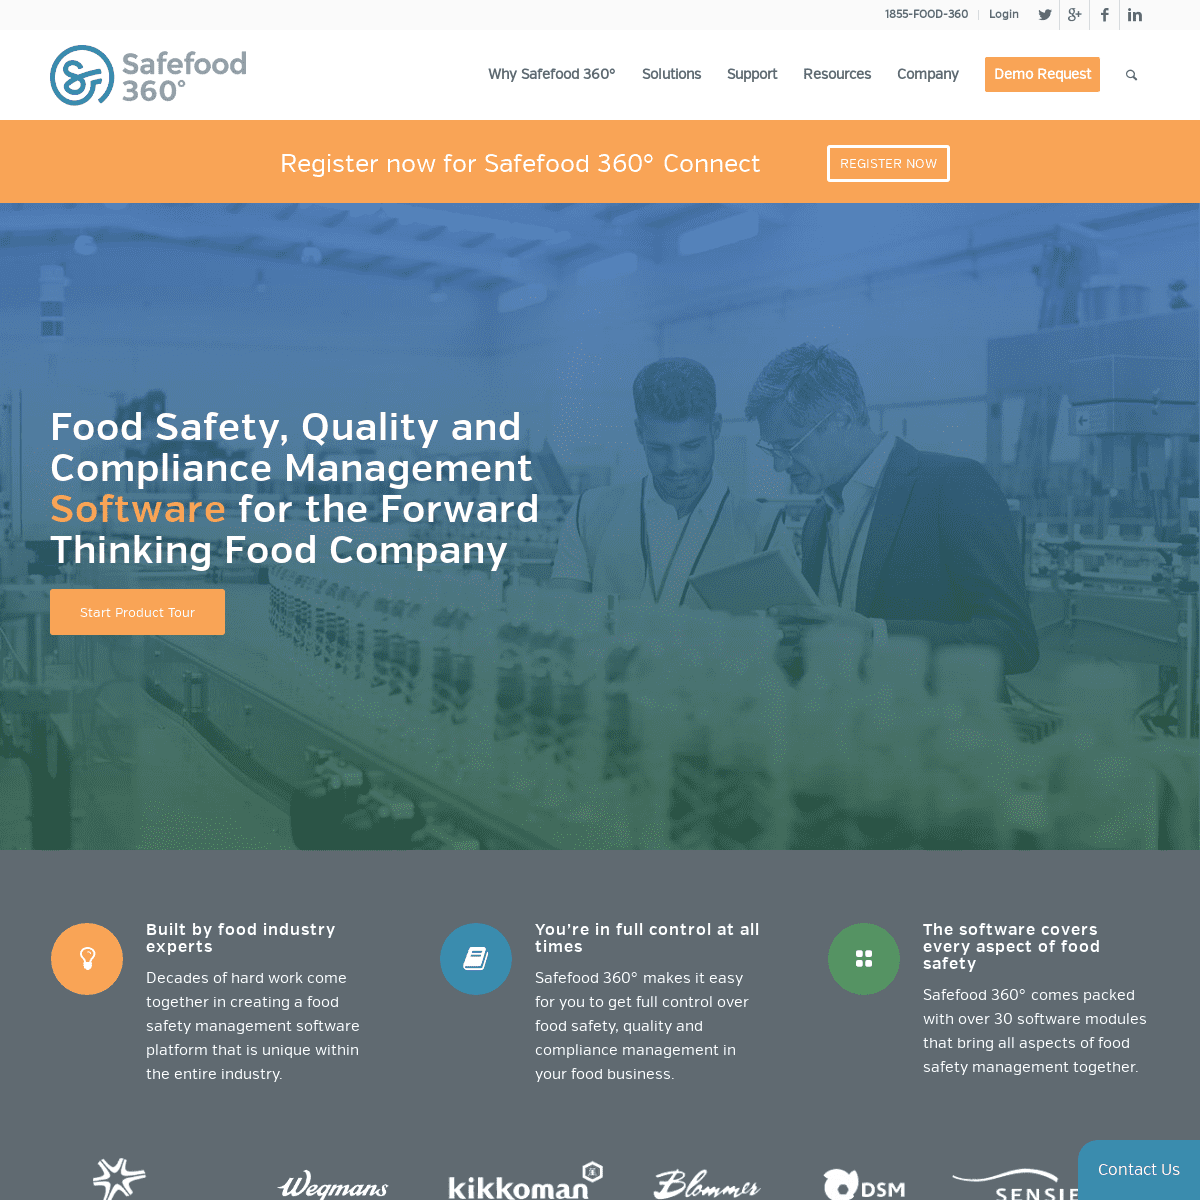 Food safety, quality and compliance management software by Safefood 360º